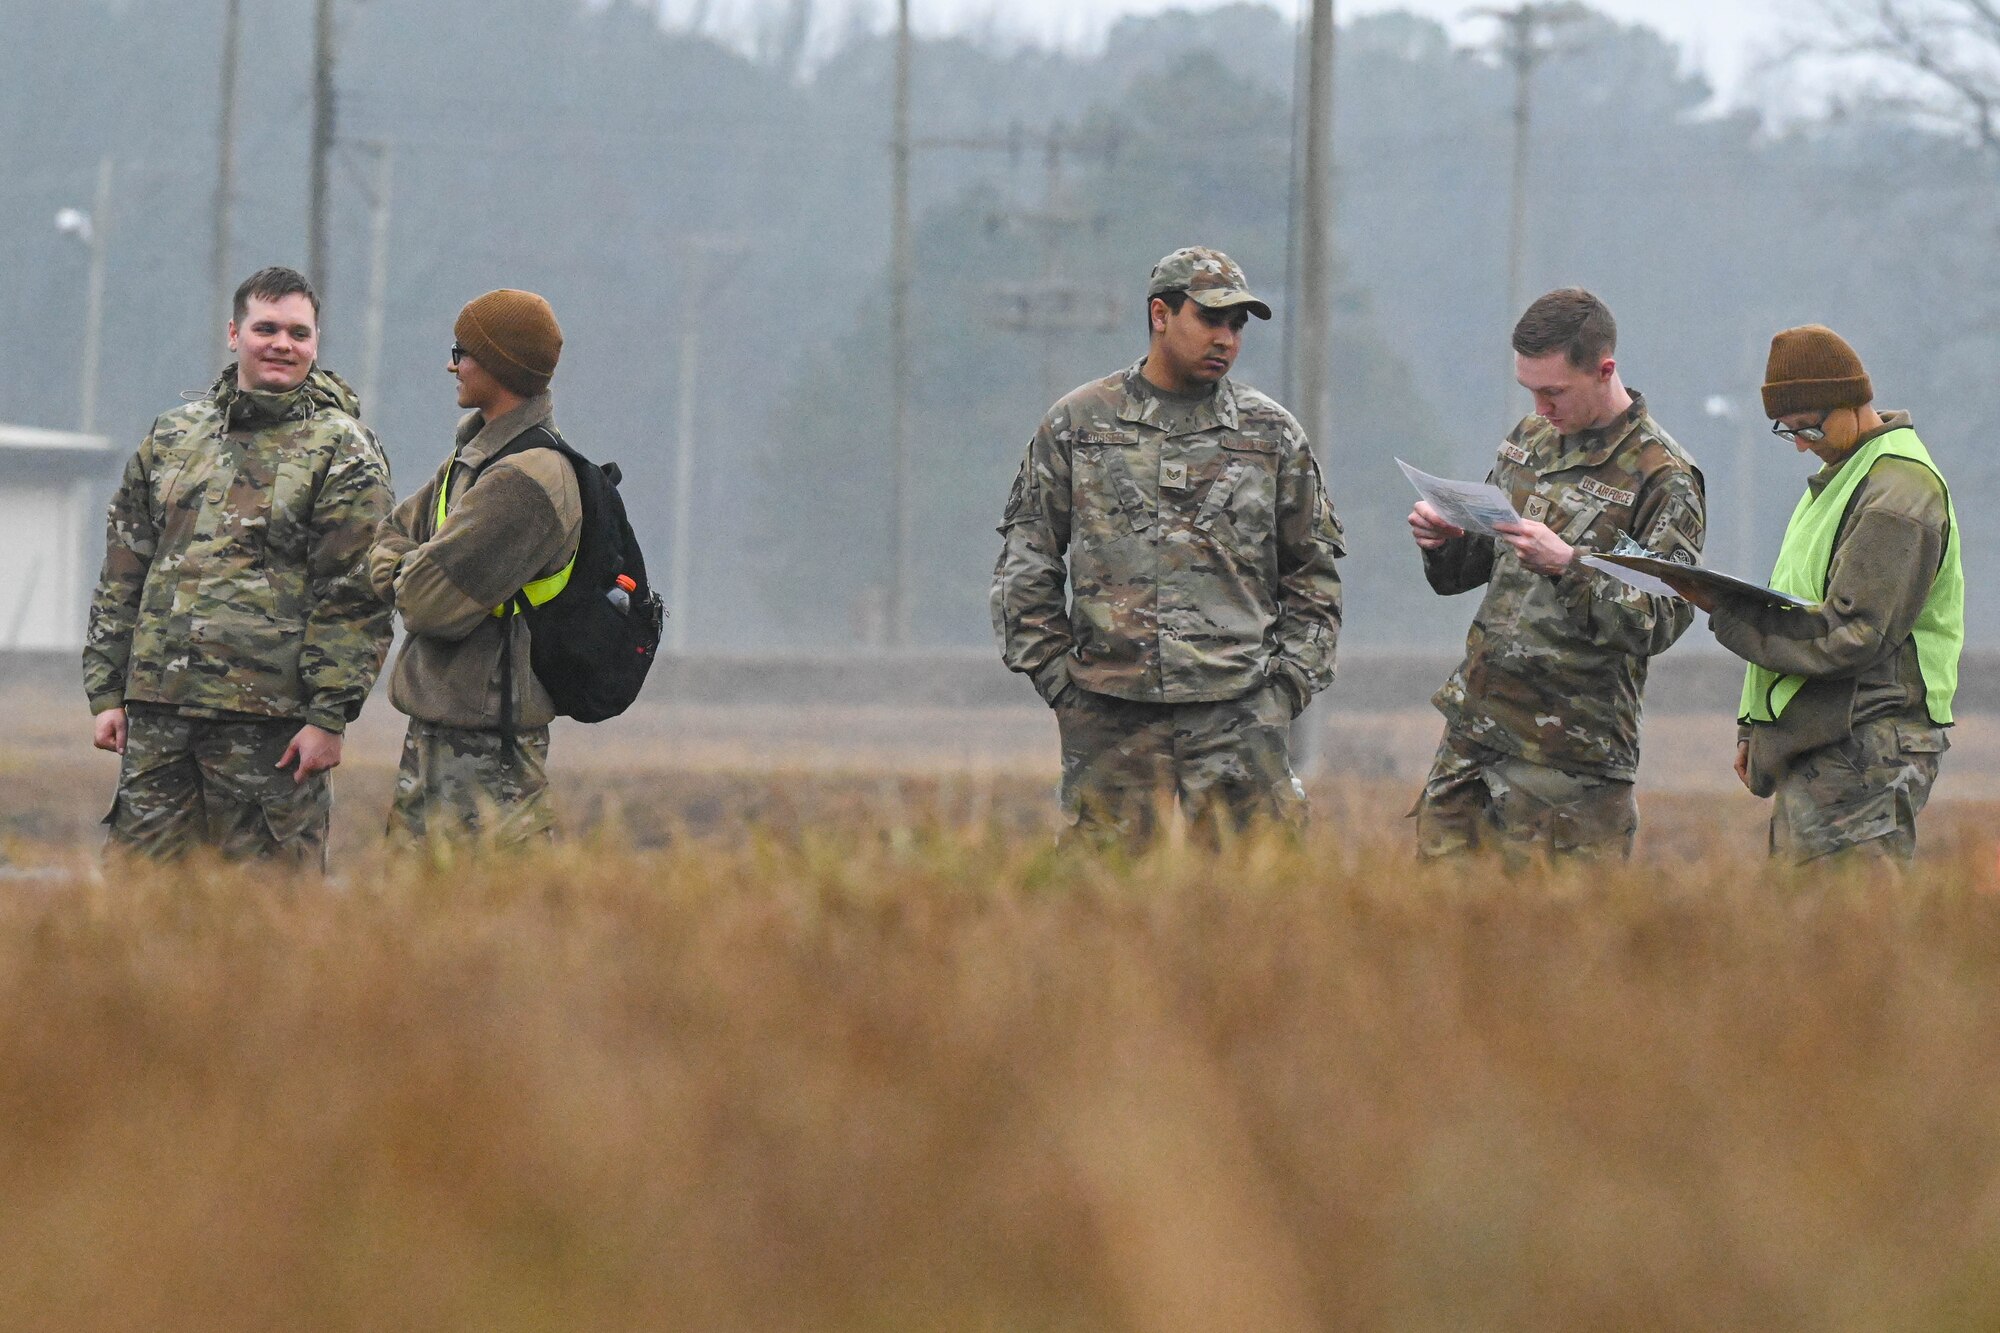 Airmen assigned to the 19th Maintenance Squadron begin Unexploded Ordnance reporting during the Readiness Games at Little Rock Air Force Base, Arkansas.